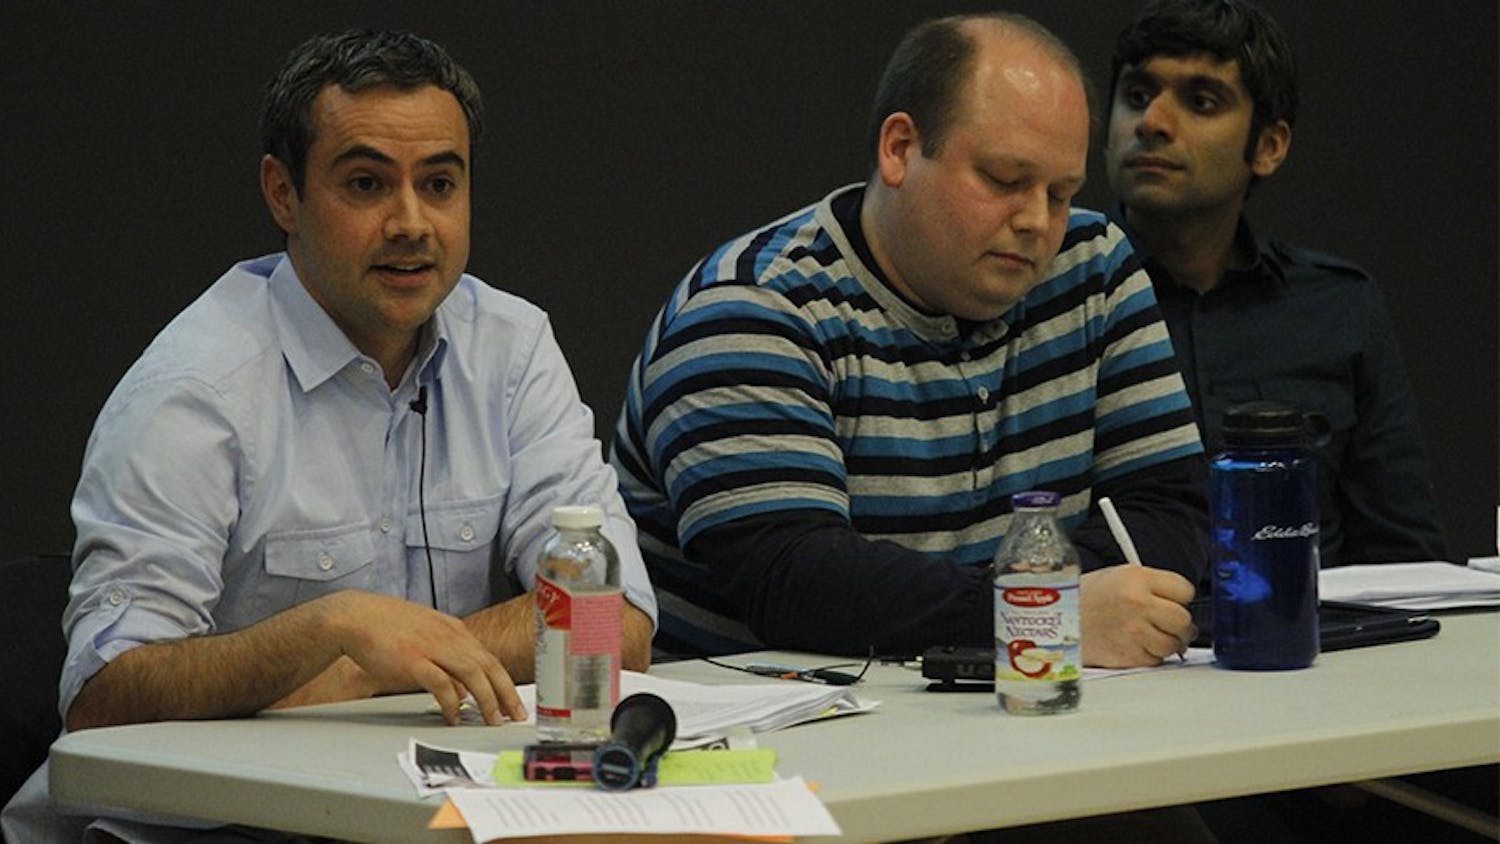 Yousuf Al-Bulushi, left, Nathan Swanson, middle, and Neel Ahuja participate in a forum.